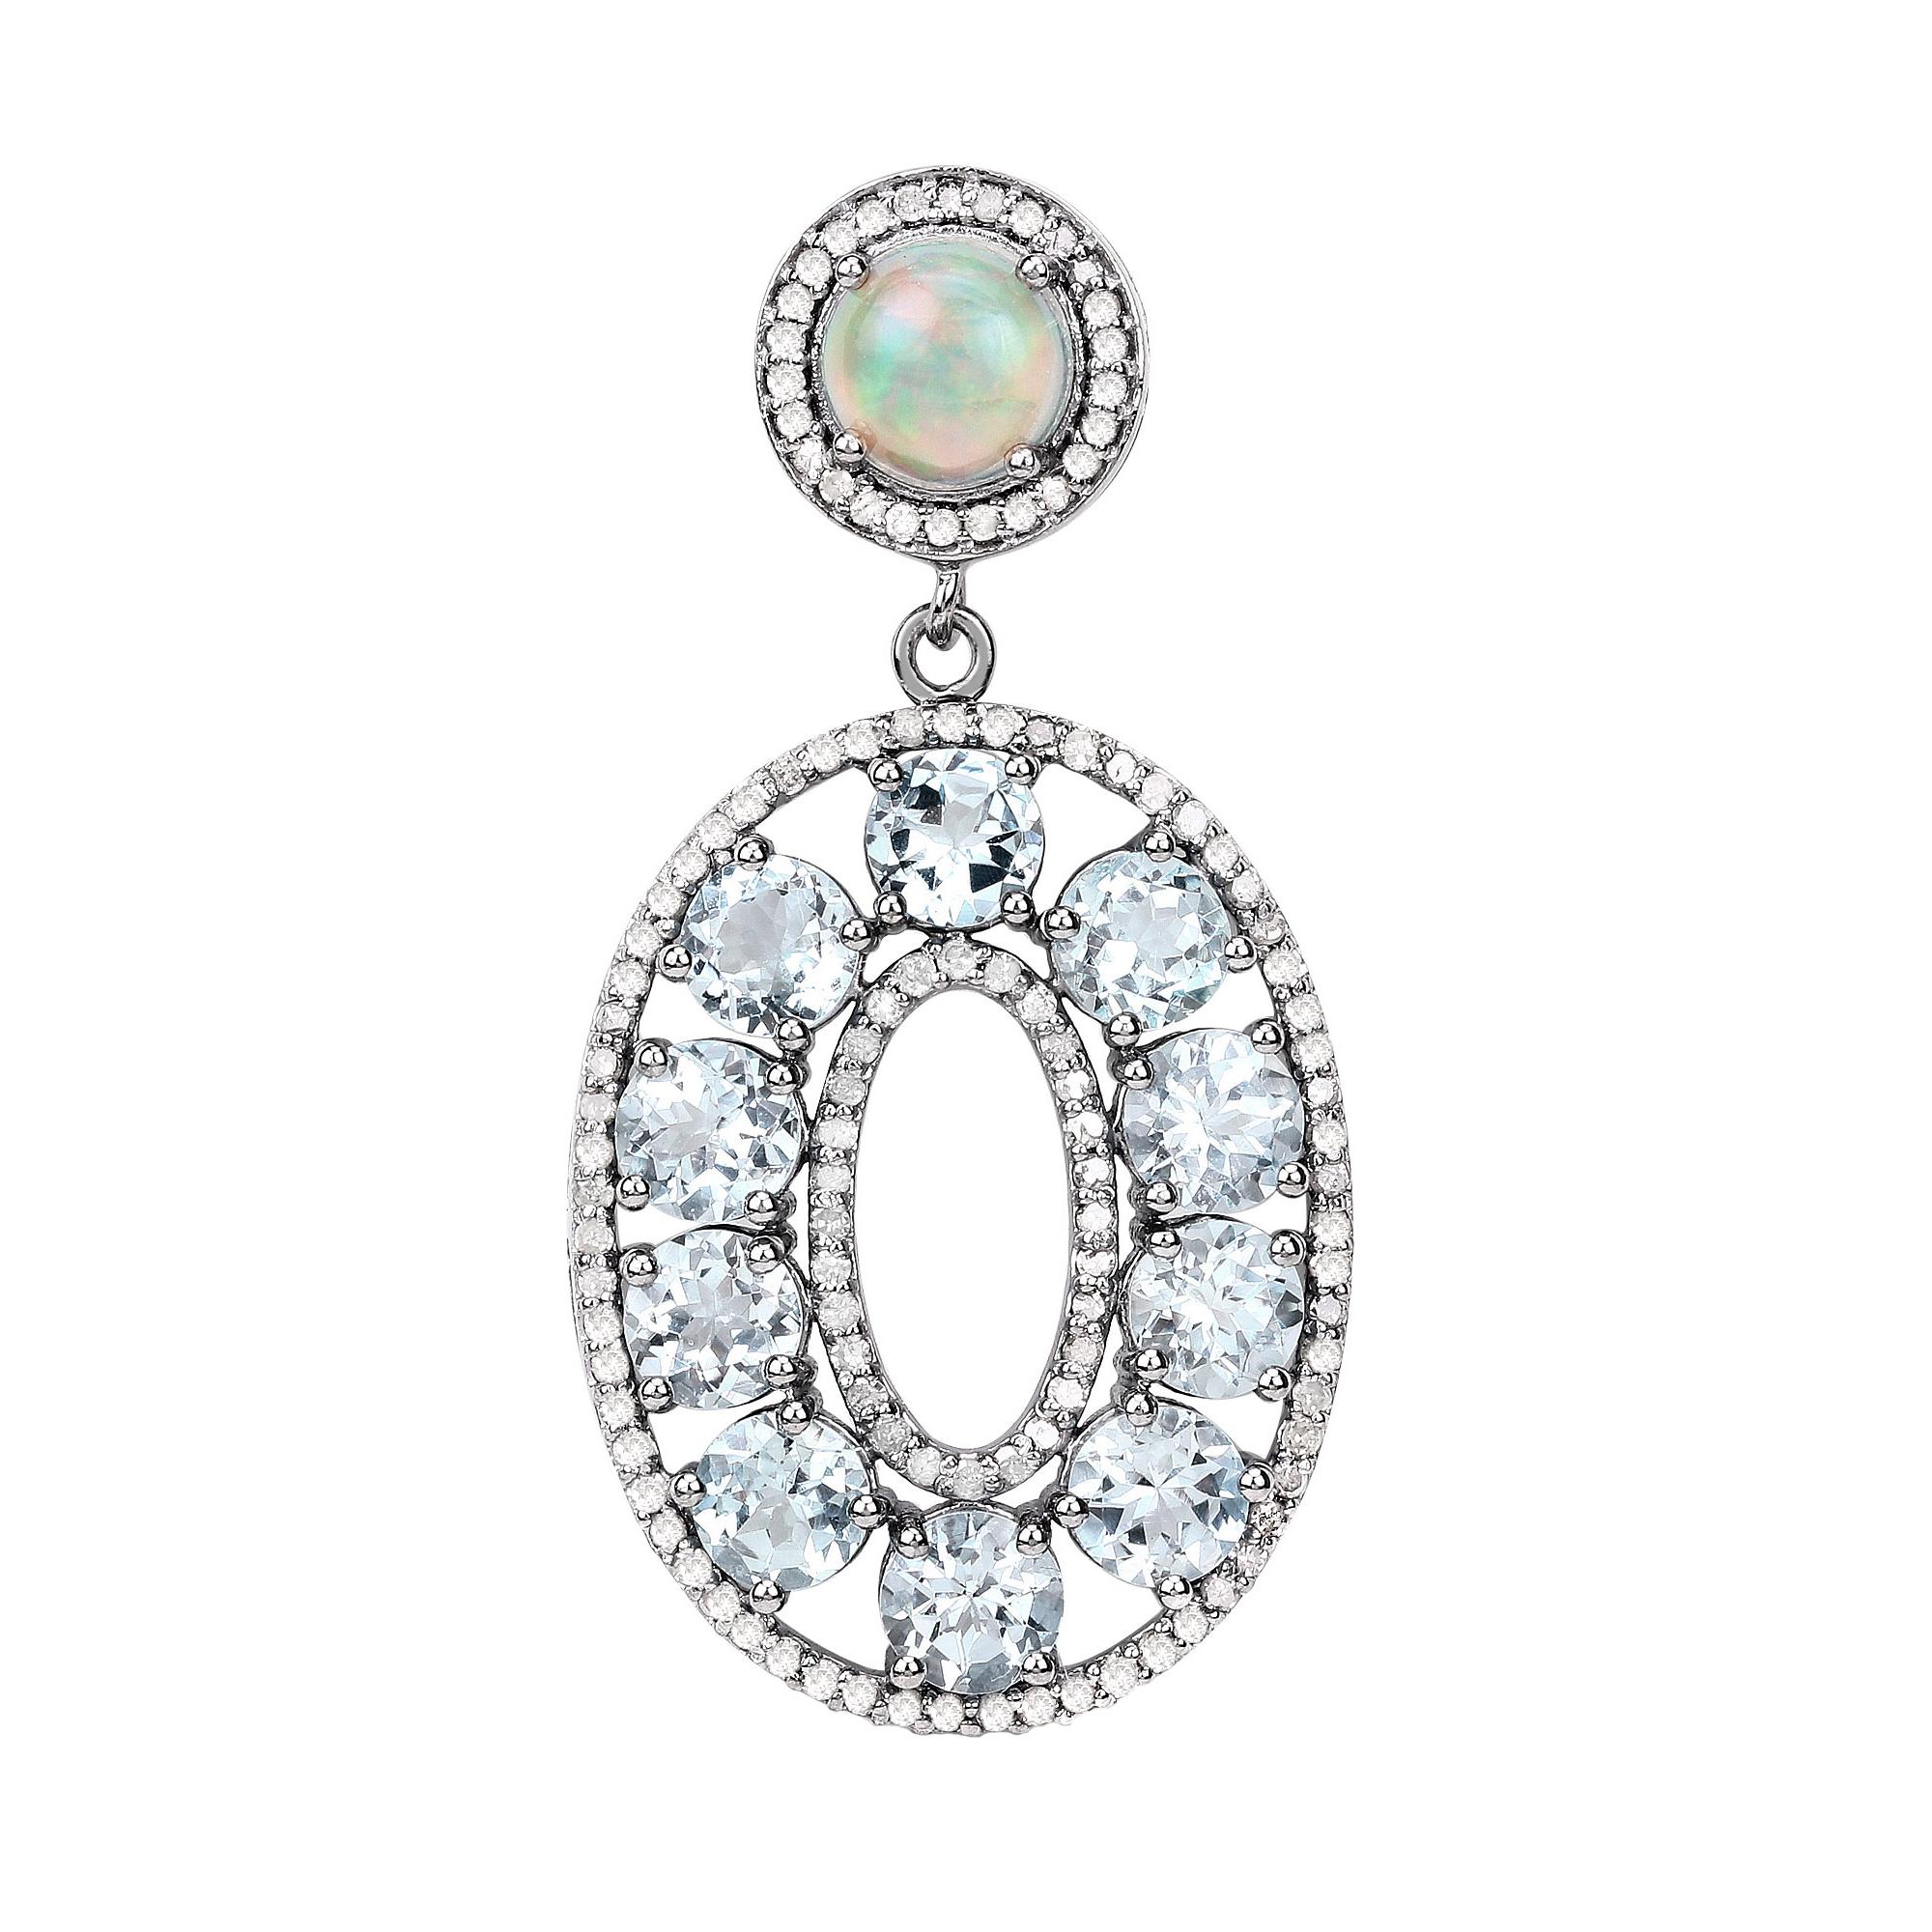 Round Cut Aquamarine Earrings With Opals and Diamonds 11.82 Carats Sterling Silver For Sale